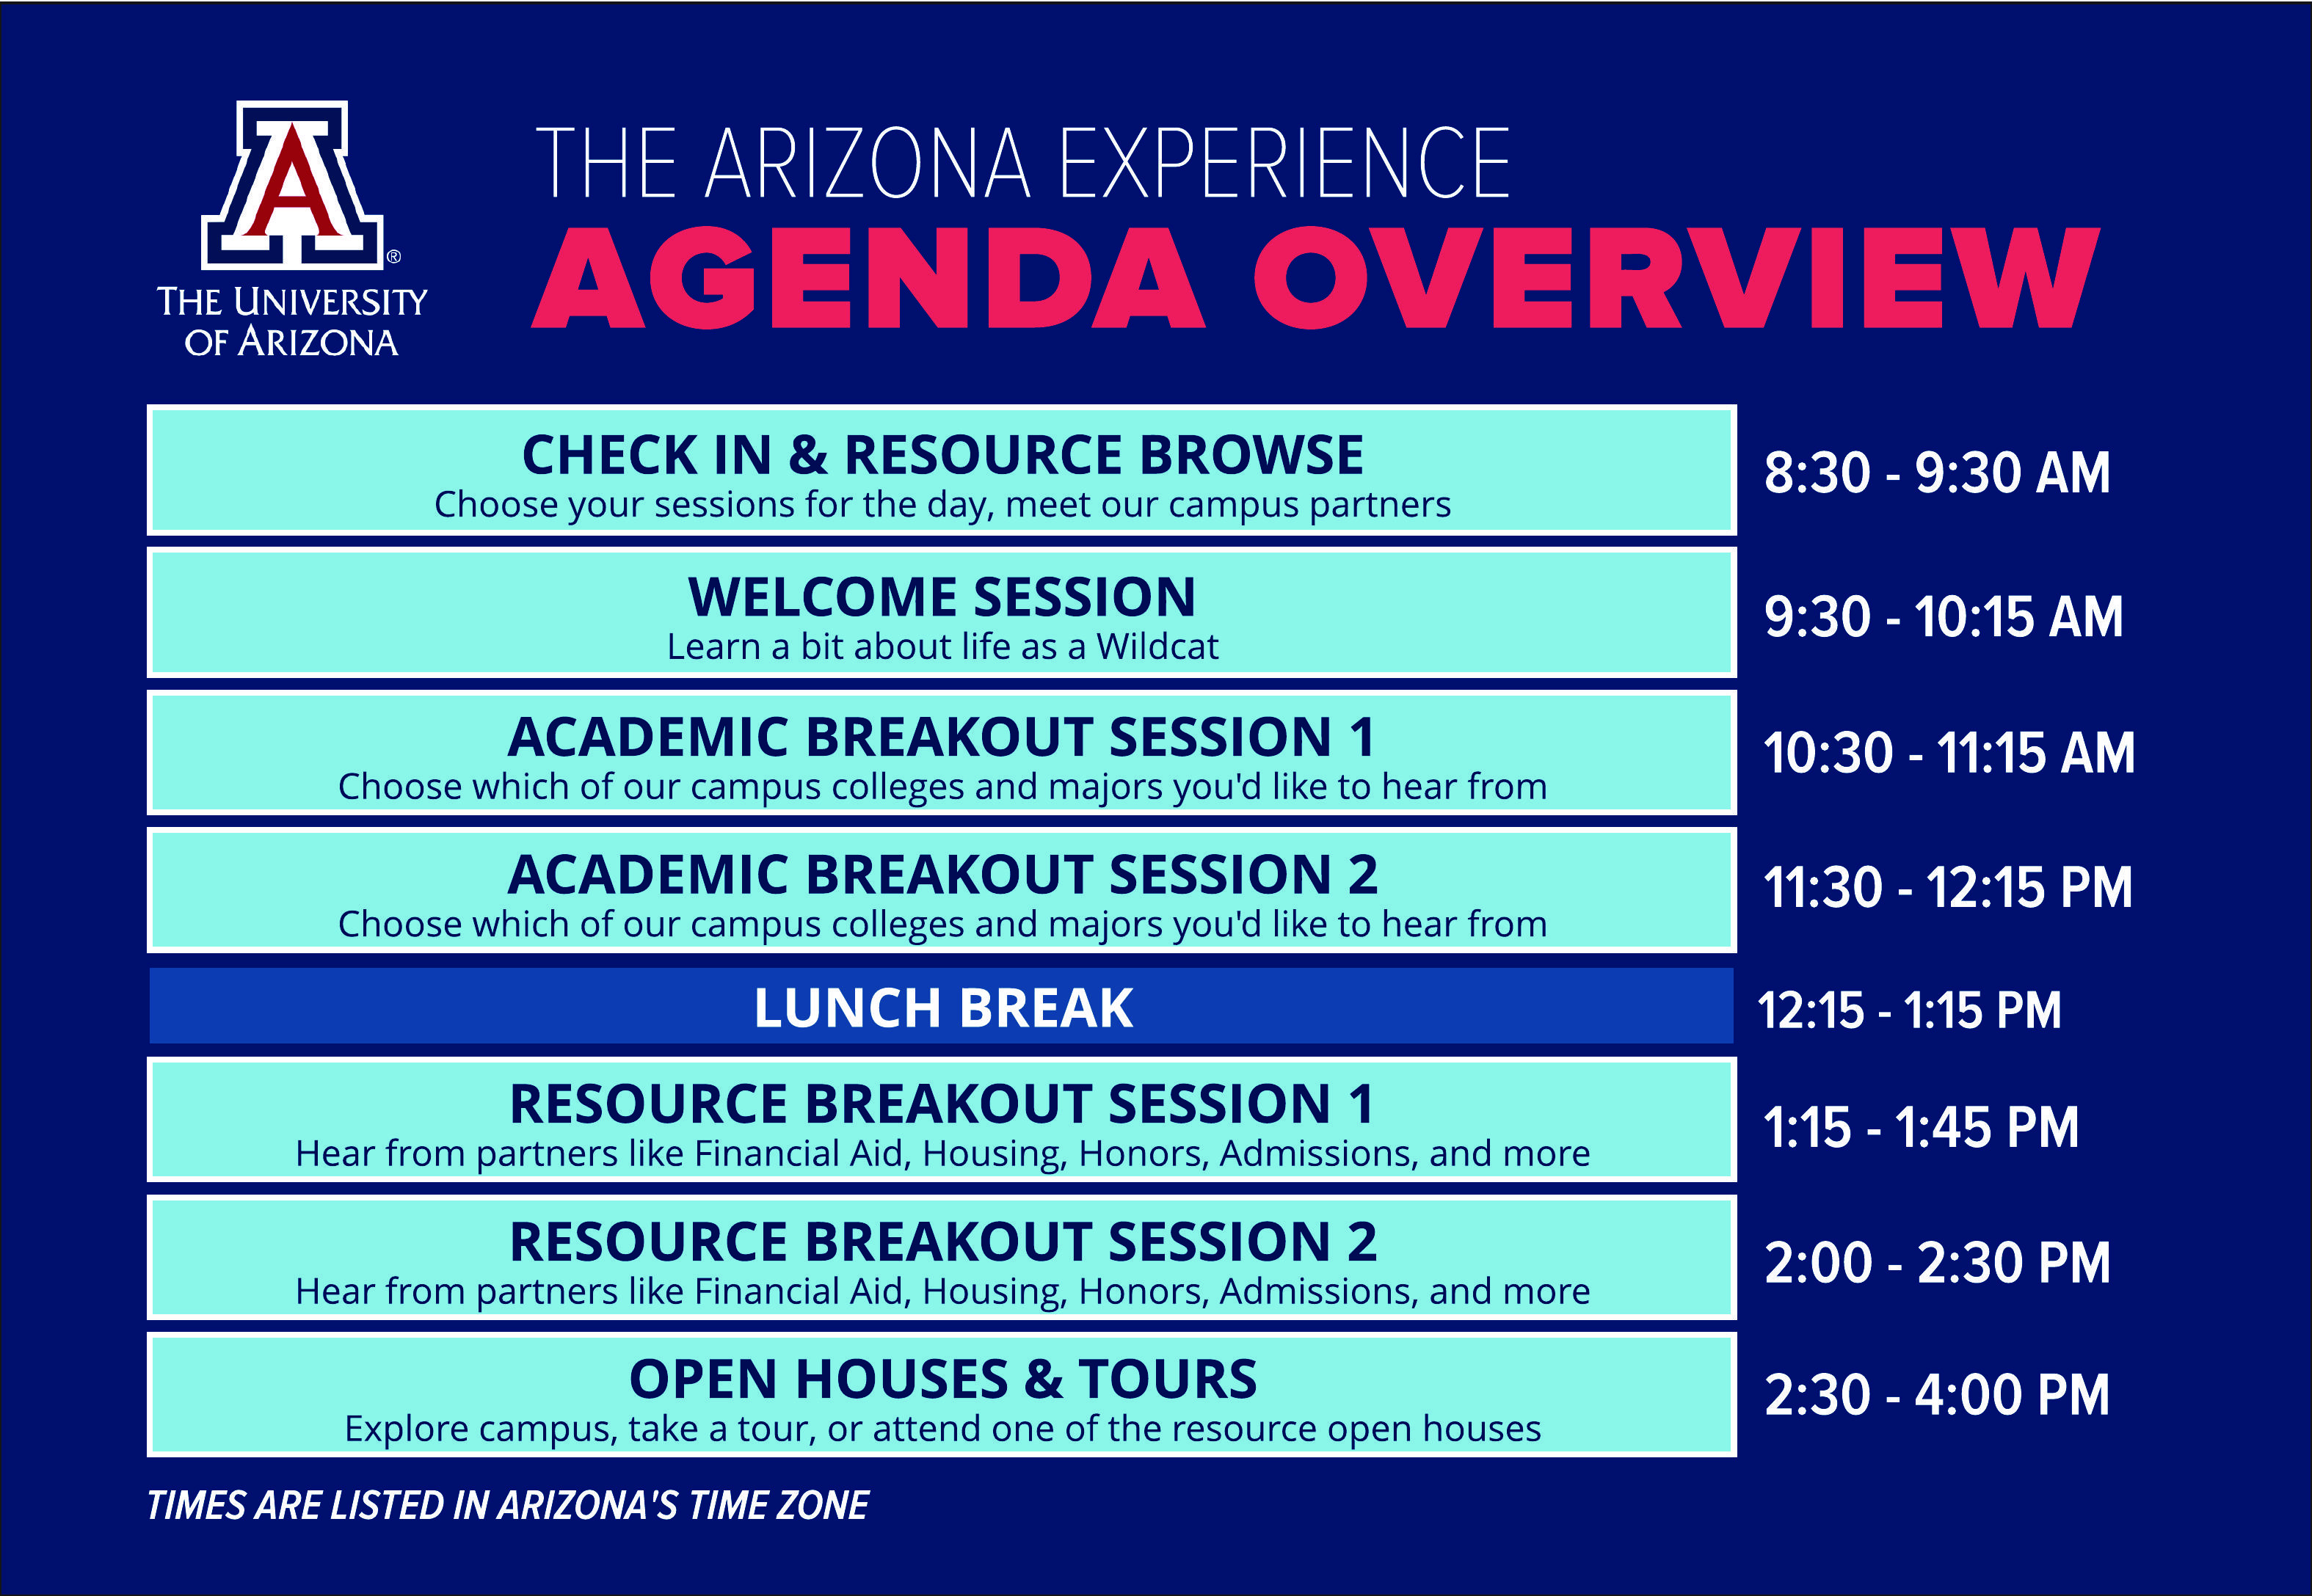 THE UNIVERSITY OF ARIZONA THE ARIZONA EXPERIENCE AGENDA OVERVIEW 8:30 - 9:30 AM CHECK-IN & RESOURCE BROWSE Choose your sessions for the day, meet our campus partners 9:30-10:15 AM WELCOME SESSION Learn a bit about life as a Wildcat 10:30-11:15 AM ACADEMIC BREAKOUT SESSION 1 Choose which of our campus colleges and majors you'd like to hear from 11:30-12:15 PM ACADEMIC BREAKOUT SESSION 2 Choose which of our campus colleges and majors you'd like to hear from 12:15 - 1:15 PM LUNCH BREAK 1:15-1:45 PM RESOURCE BREAKOUT SESSION 1 Hear from partners like Financial Aid, Housing, Honors, Admissions, and more 2:00 - 2:30 PM RESOURCE BREAKOUT SESSION 2 Hear from partners like Financial Aid, Housing, Honors, Admissions, and more 2:30 - 4:00 PM OPEN HOUSES & TOURS Explore campus, take a tour, or attend one of the resource open houses TIMES ARE LISTED IN ARIZONA'S TIME ZONE